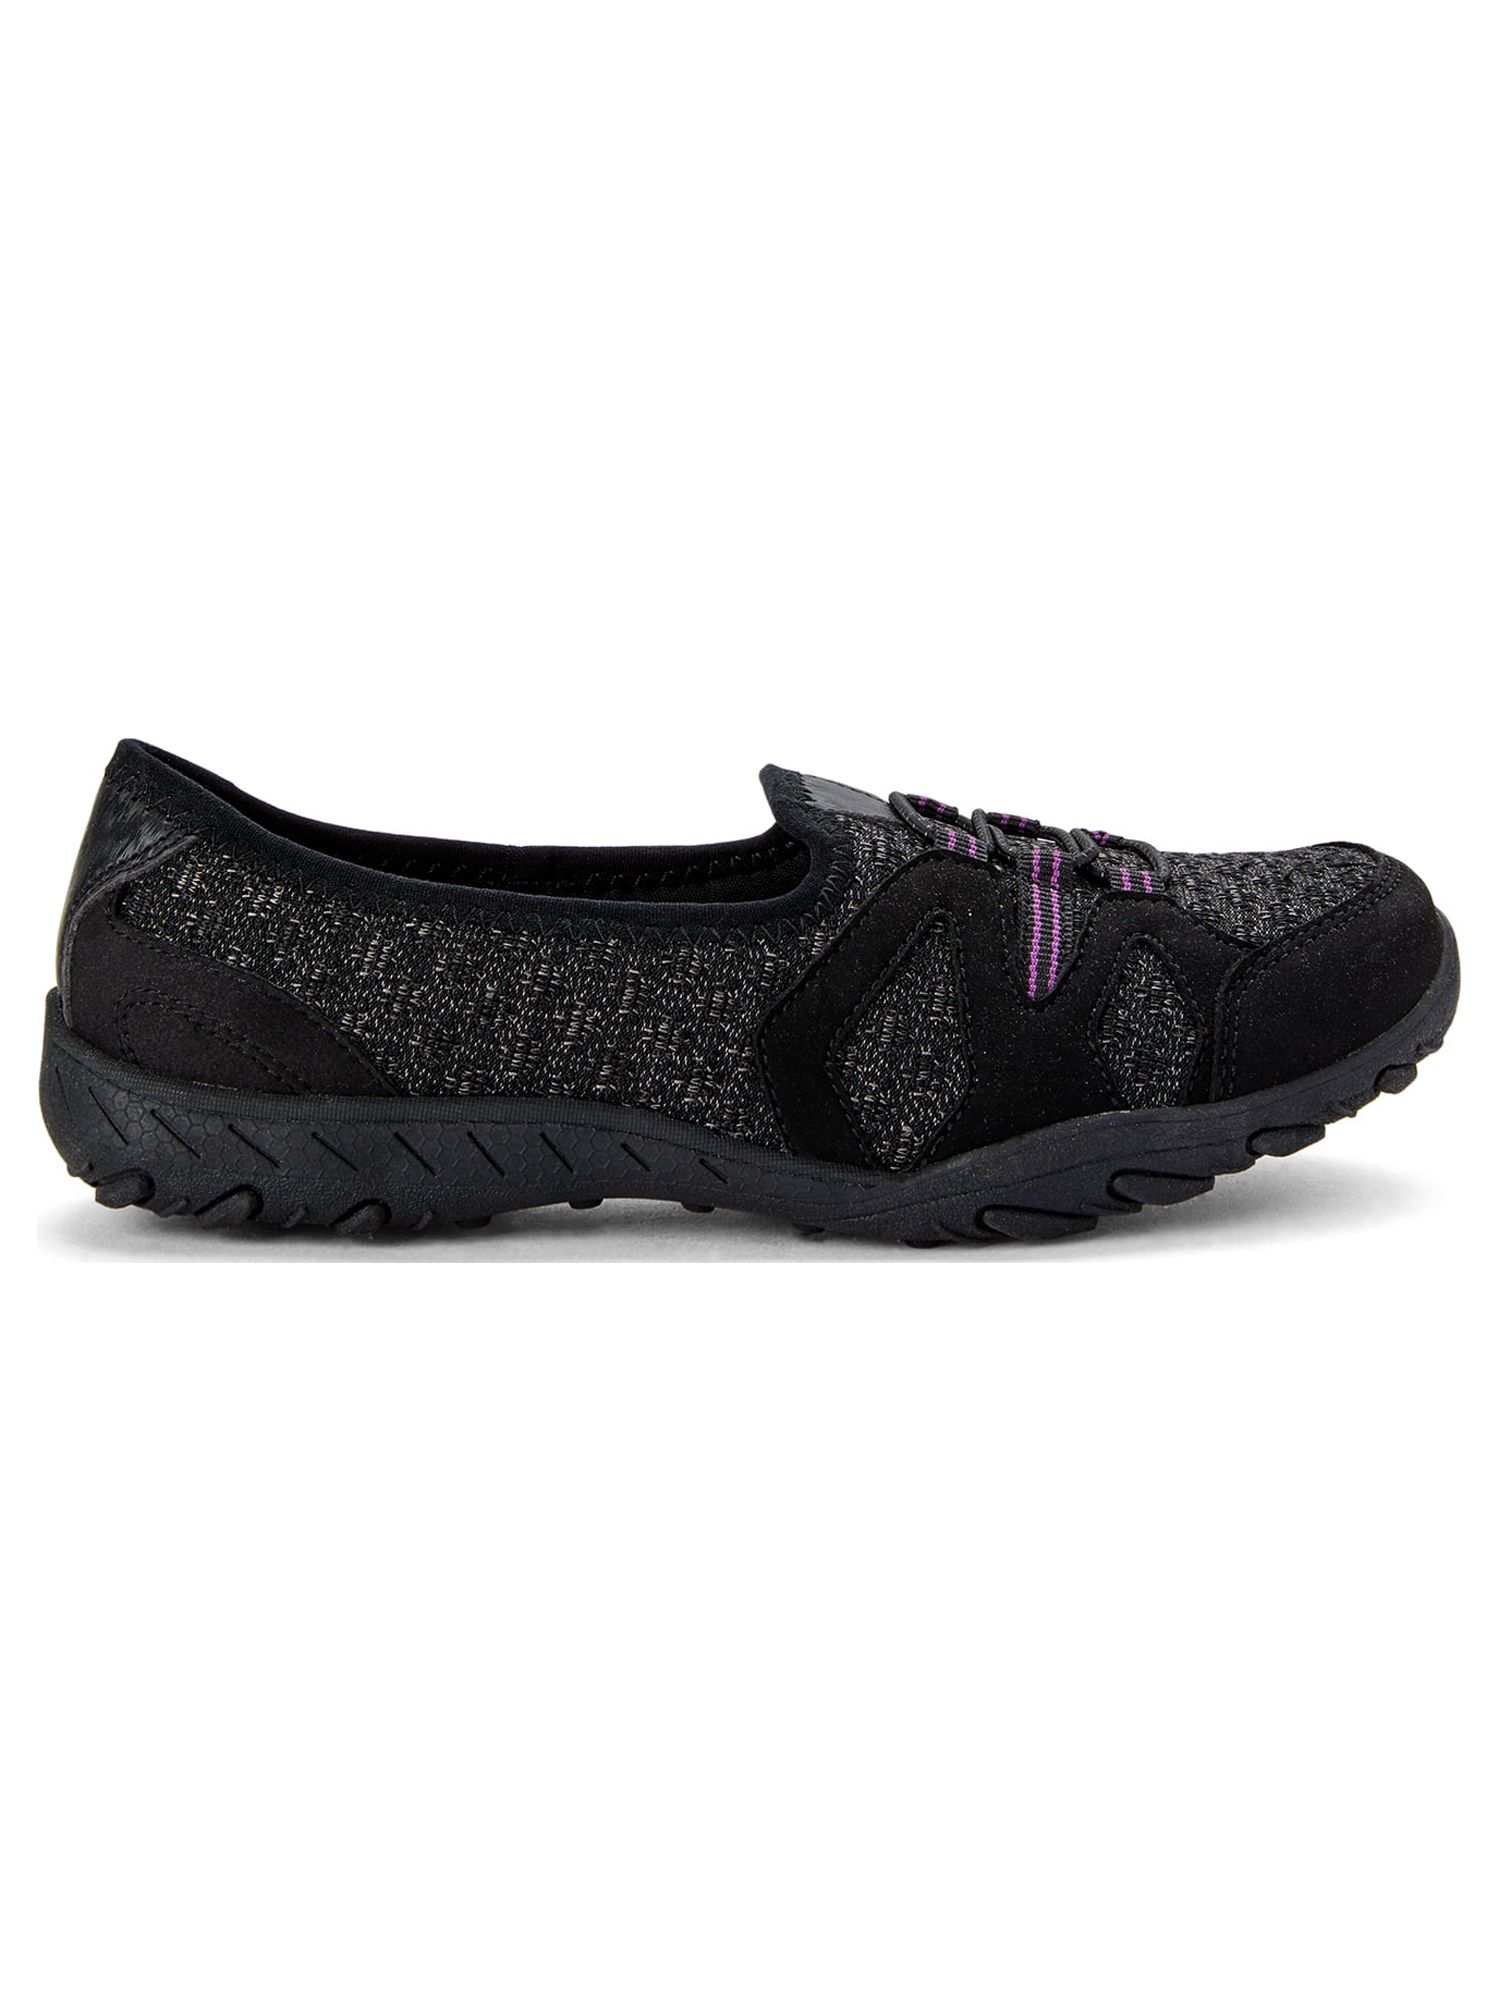 Athletic Works Women's Low Bungee Sneaker (Wide Width Available) - image 3 of 6